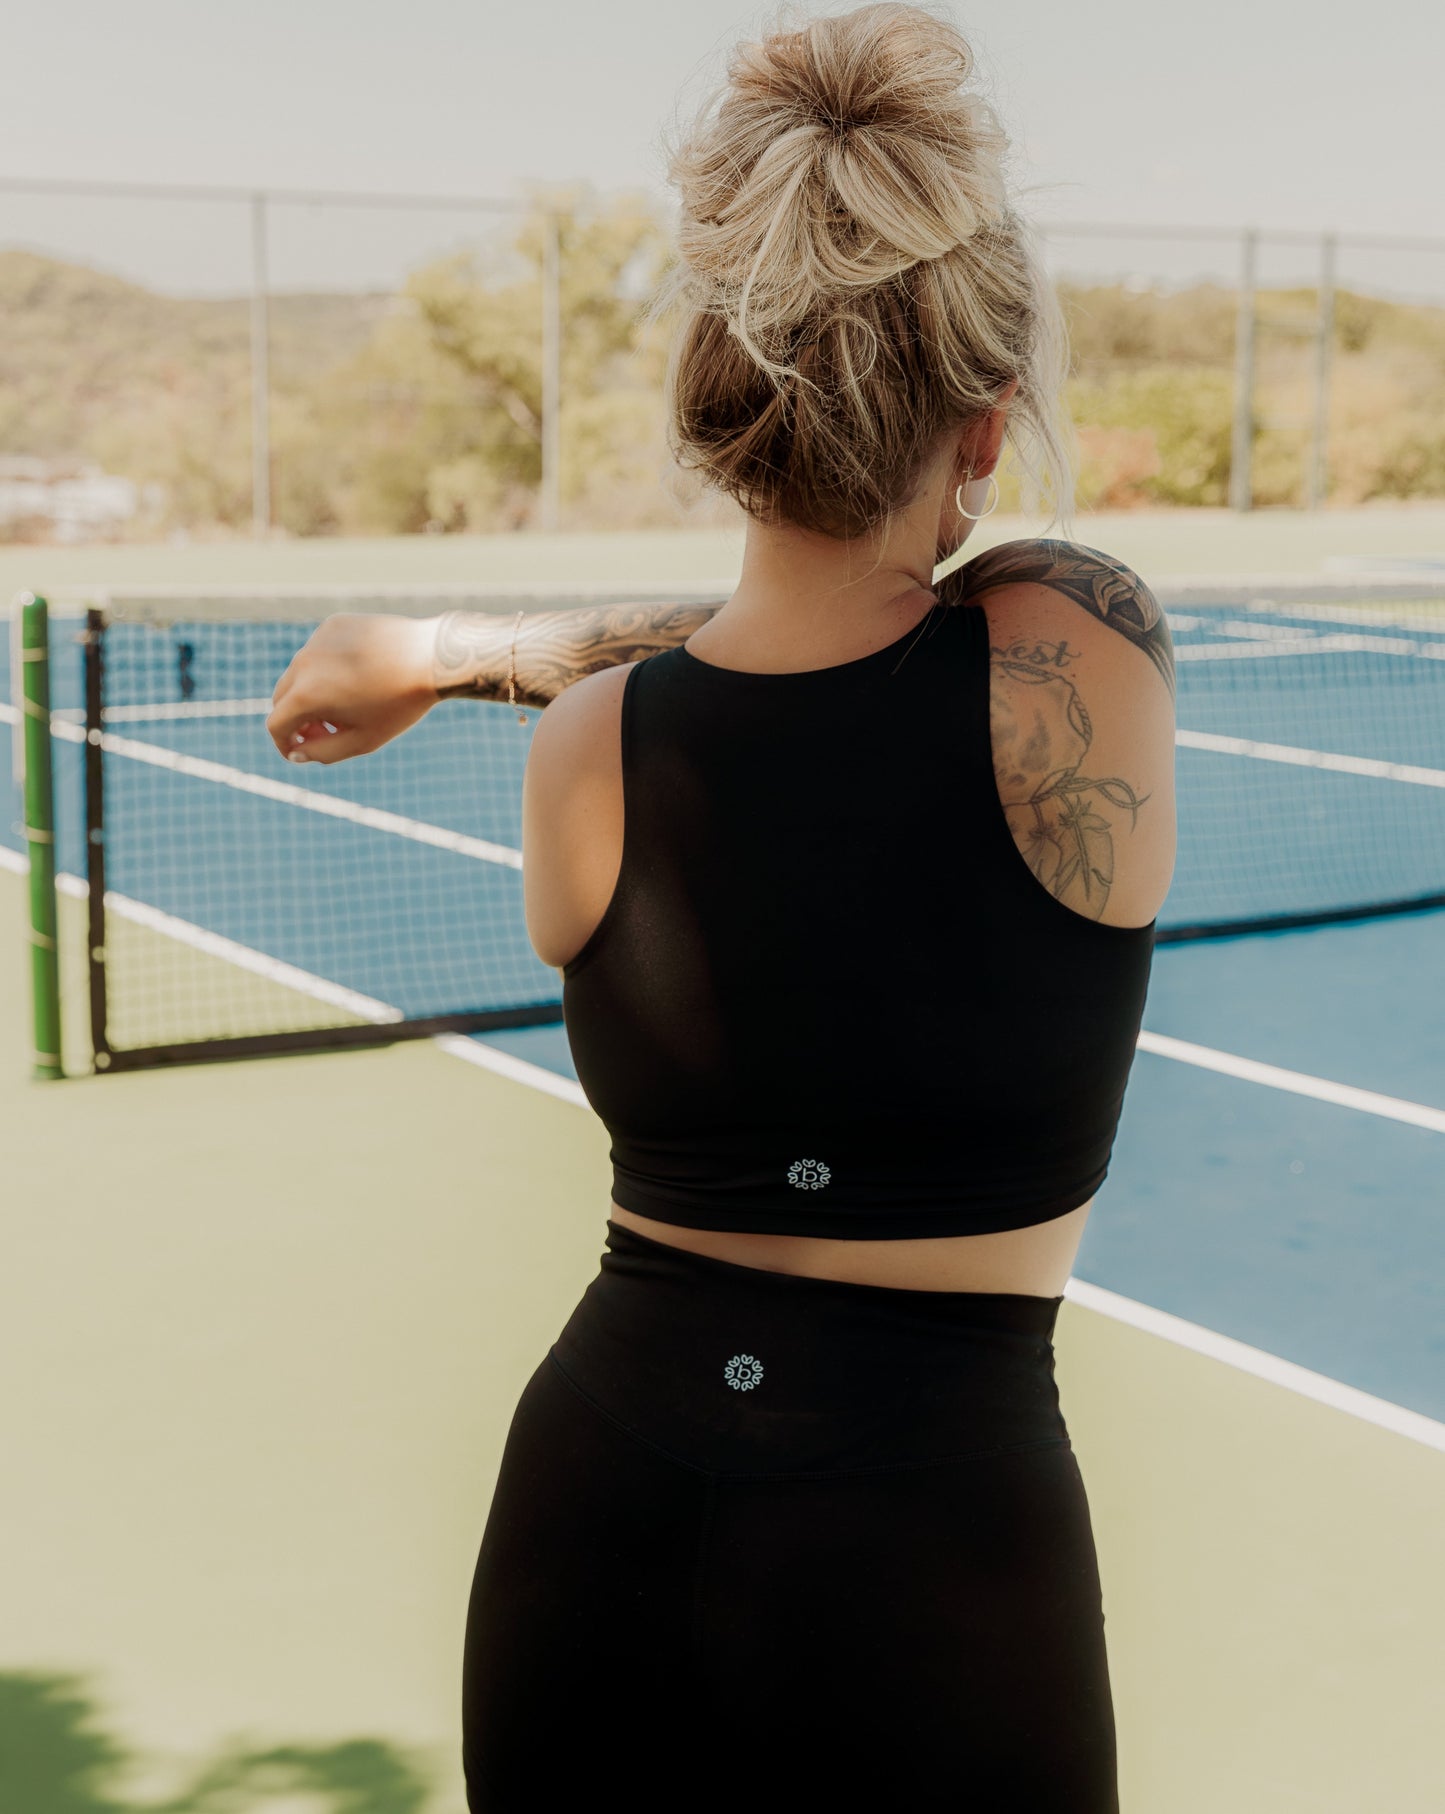 Blonde haired women standing on the middle of a tennis court.  She is facing the opposite direction and is wearing a matching tank top and biker short activewear set.